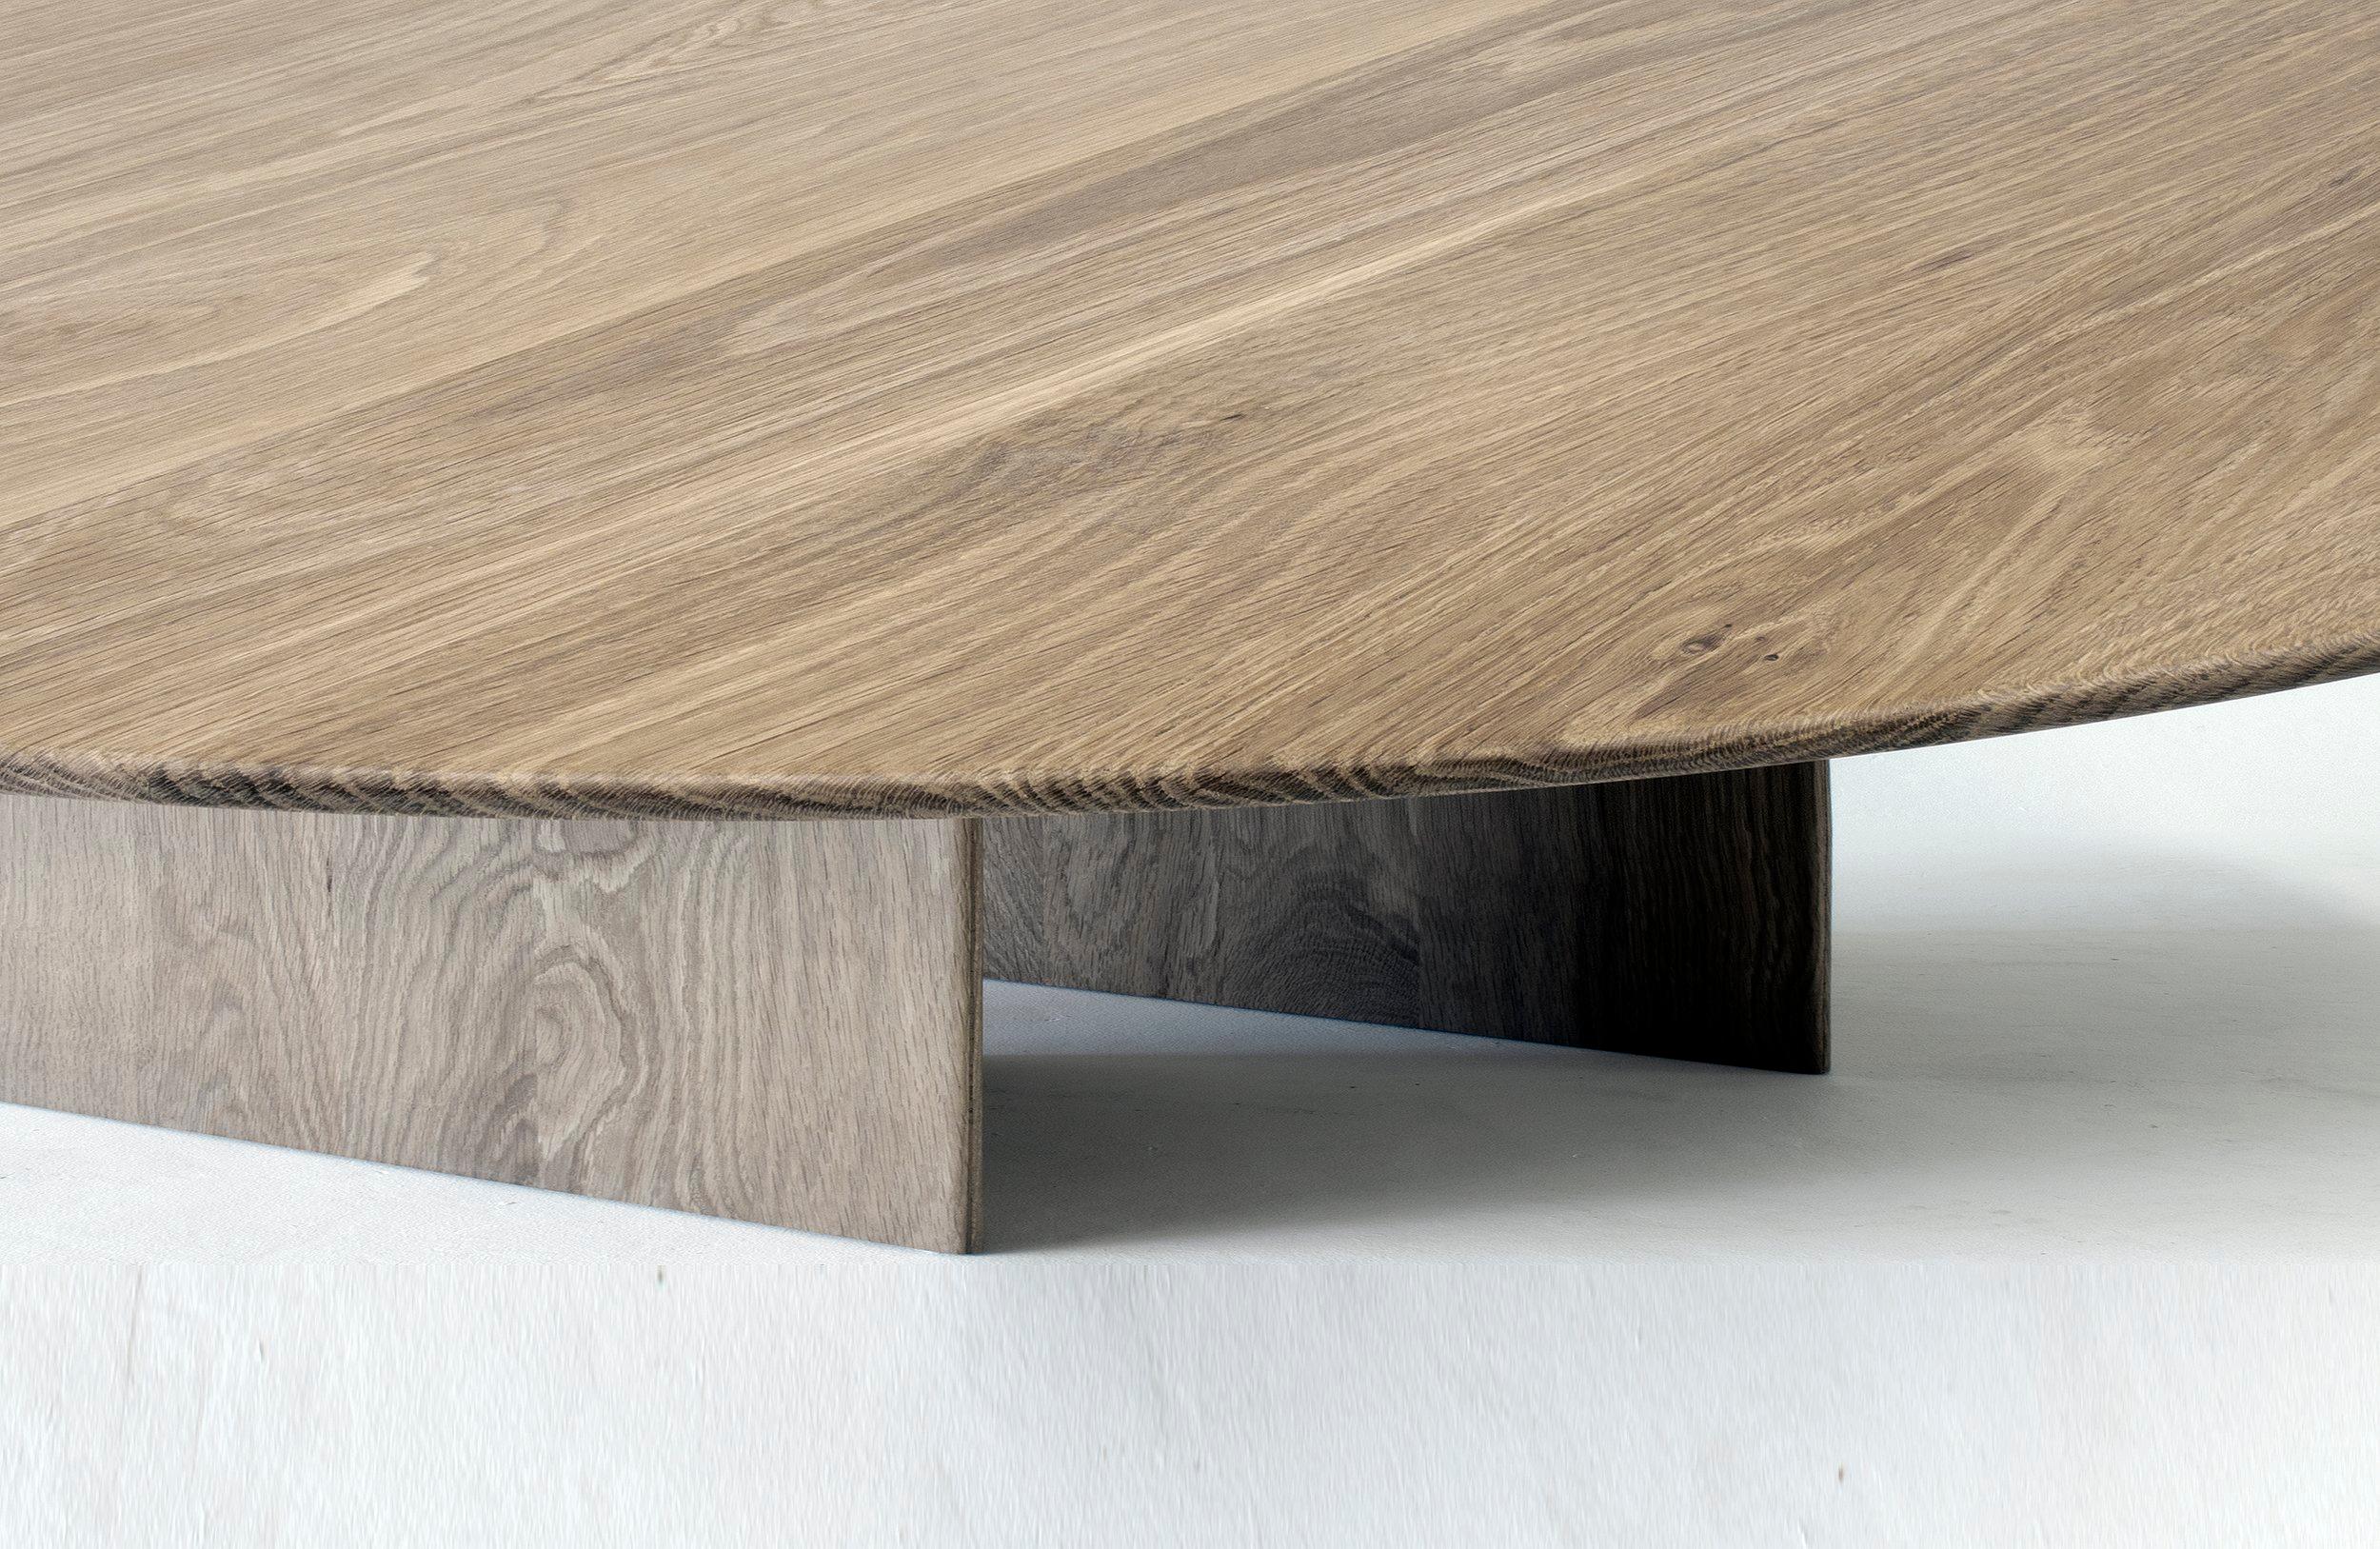 The coffee table version of this table explores similar ideas to the dining table Great Expectations that inspired the design for this piece.  The offset base allows for a variety of differing visuals depending on the line of sight while the thin